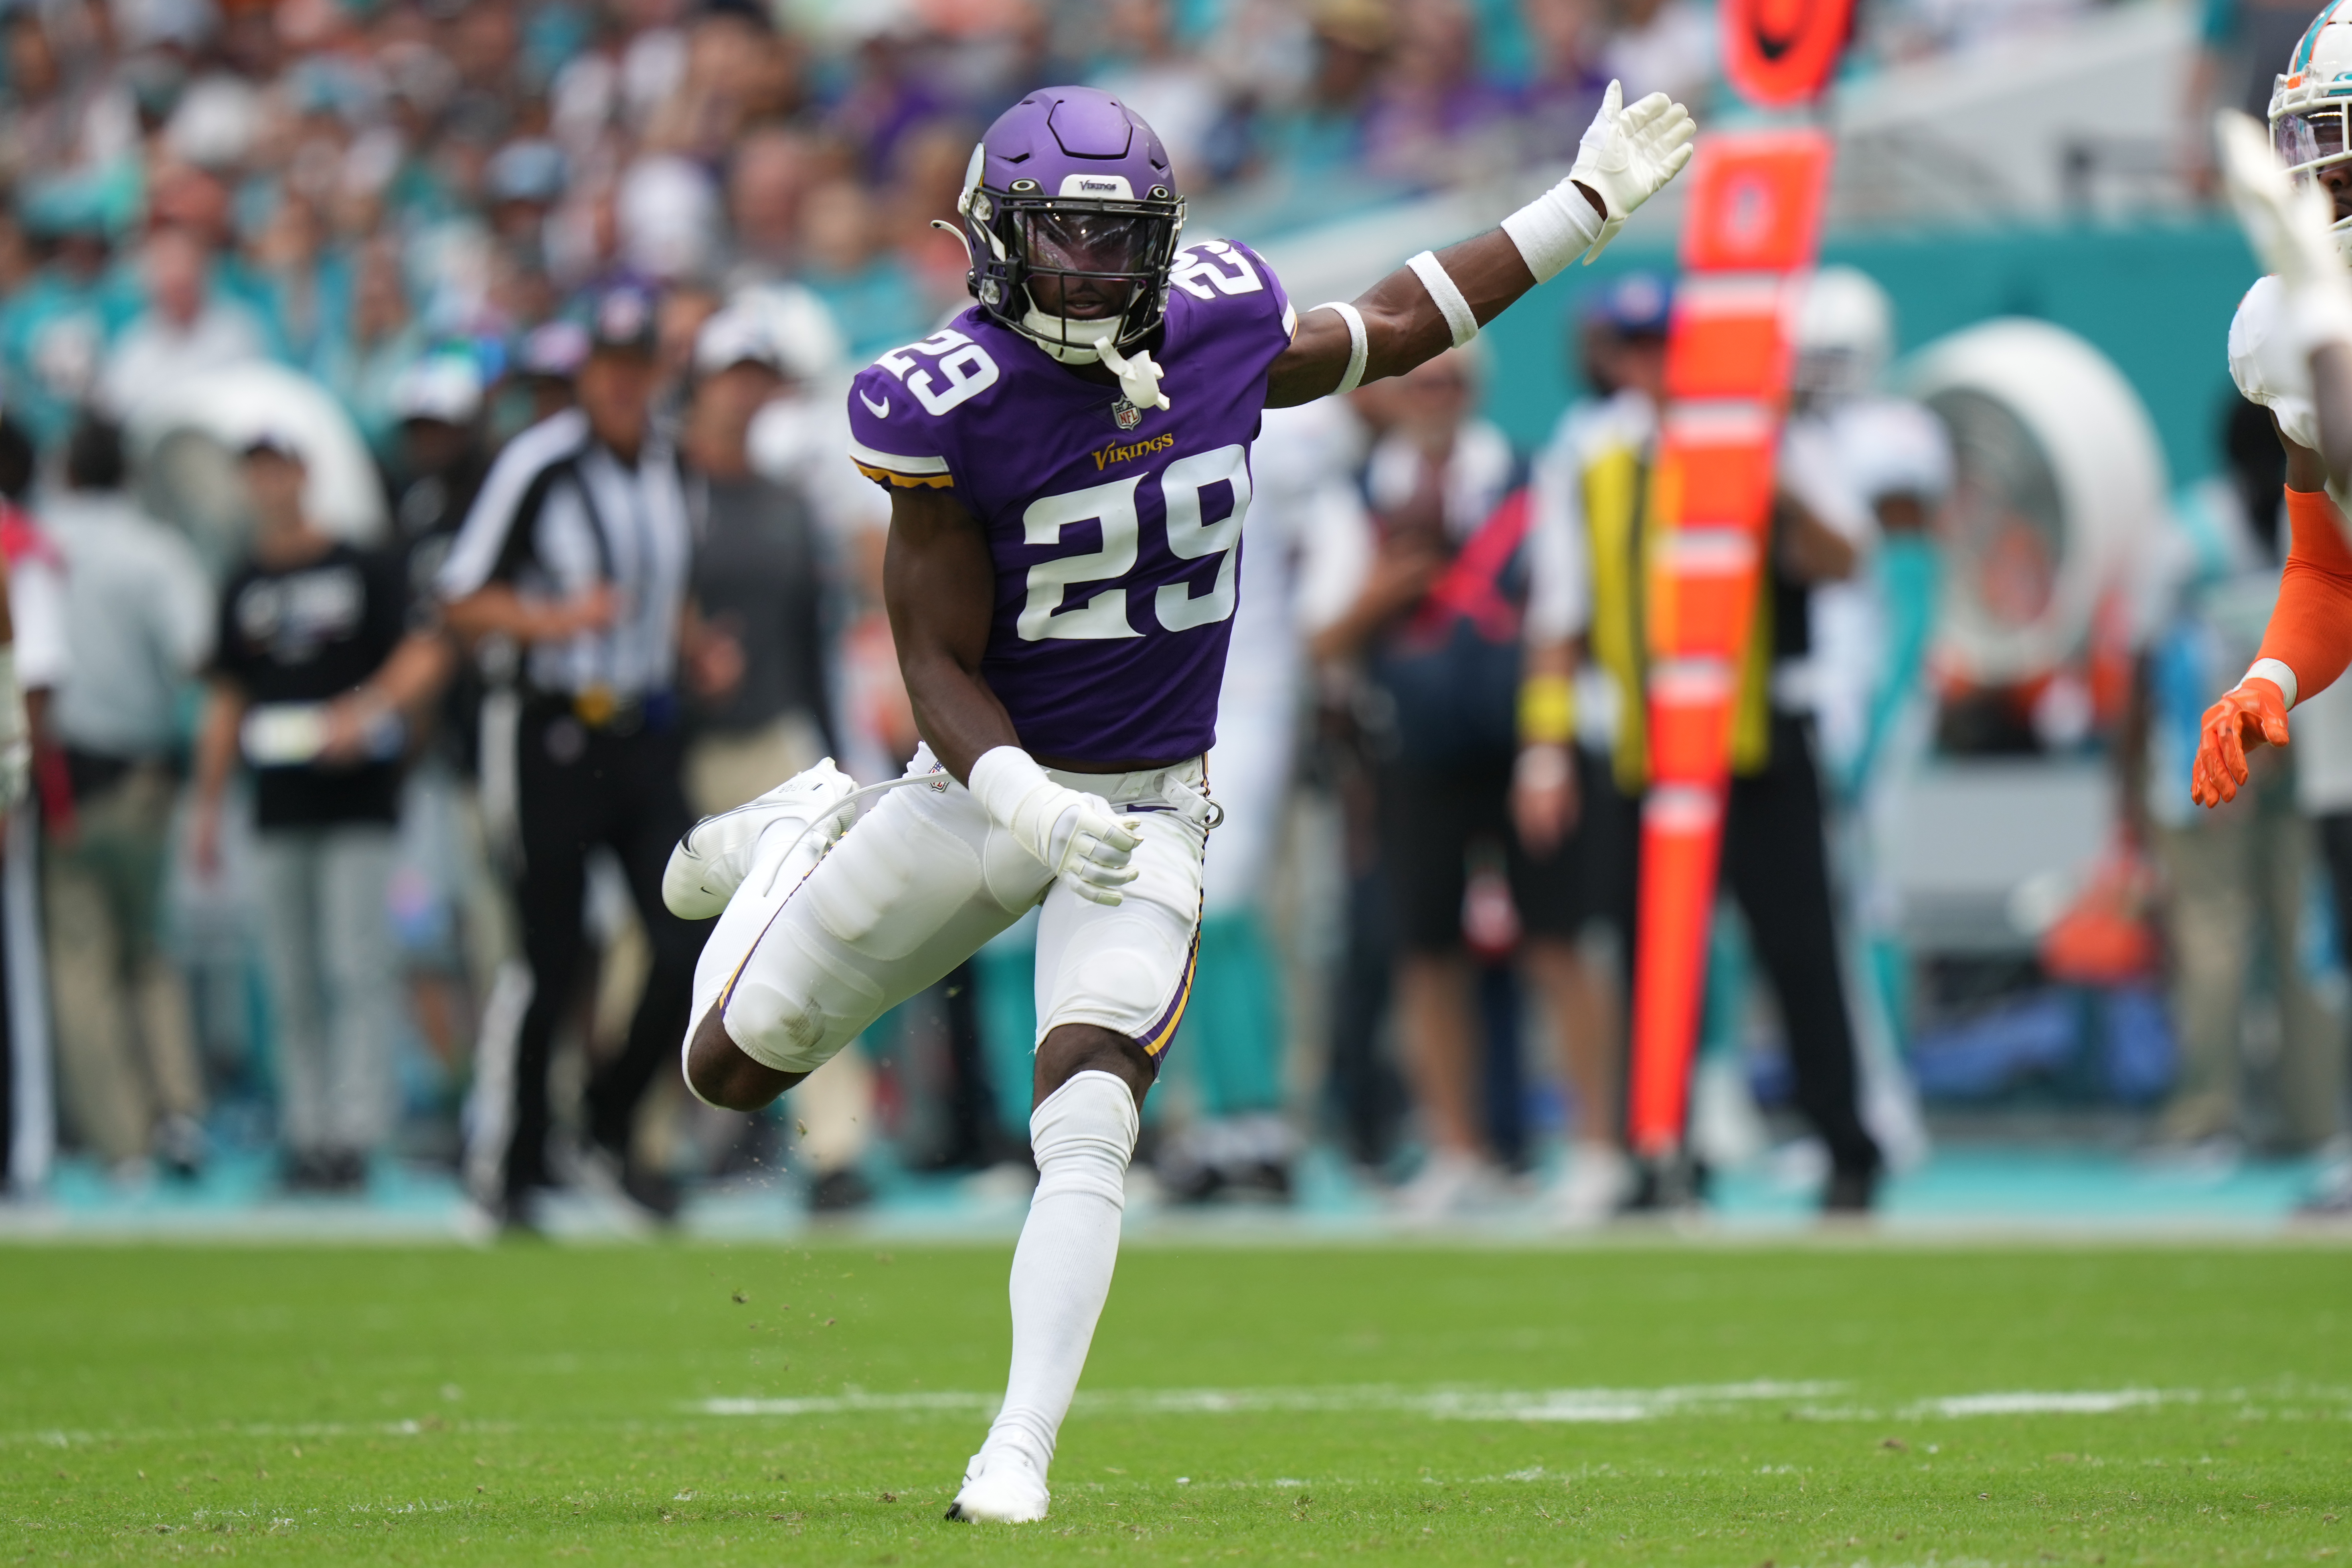 NFL: OCT 16 Vikings at Dolphins